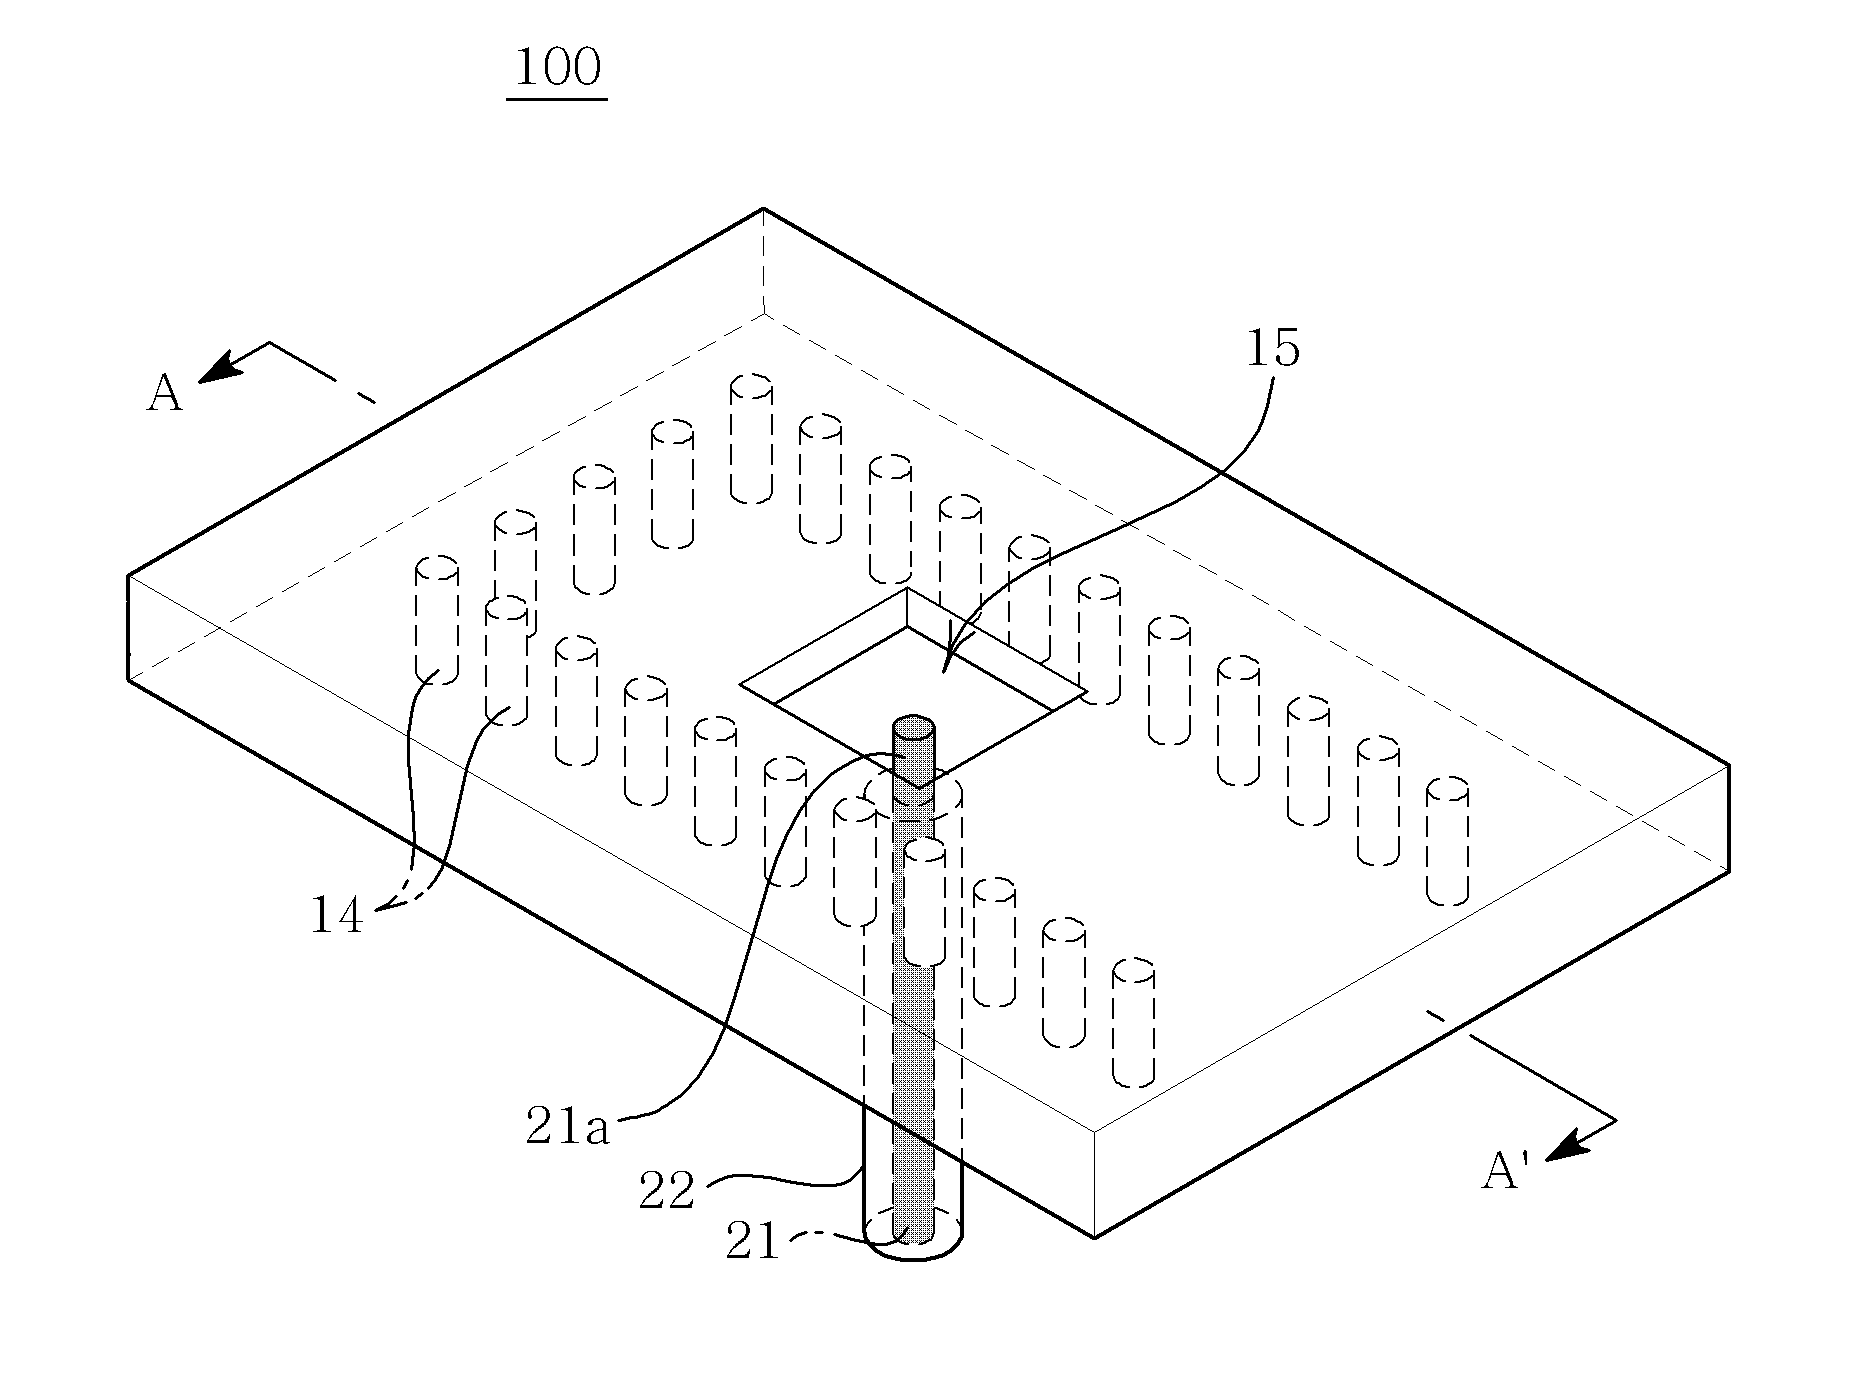 Wideband transmission line - waveguide transition apparatus